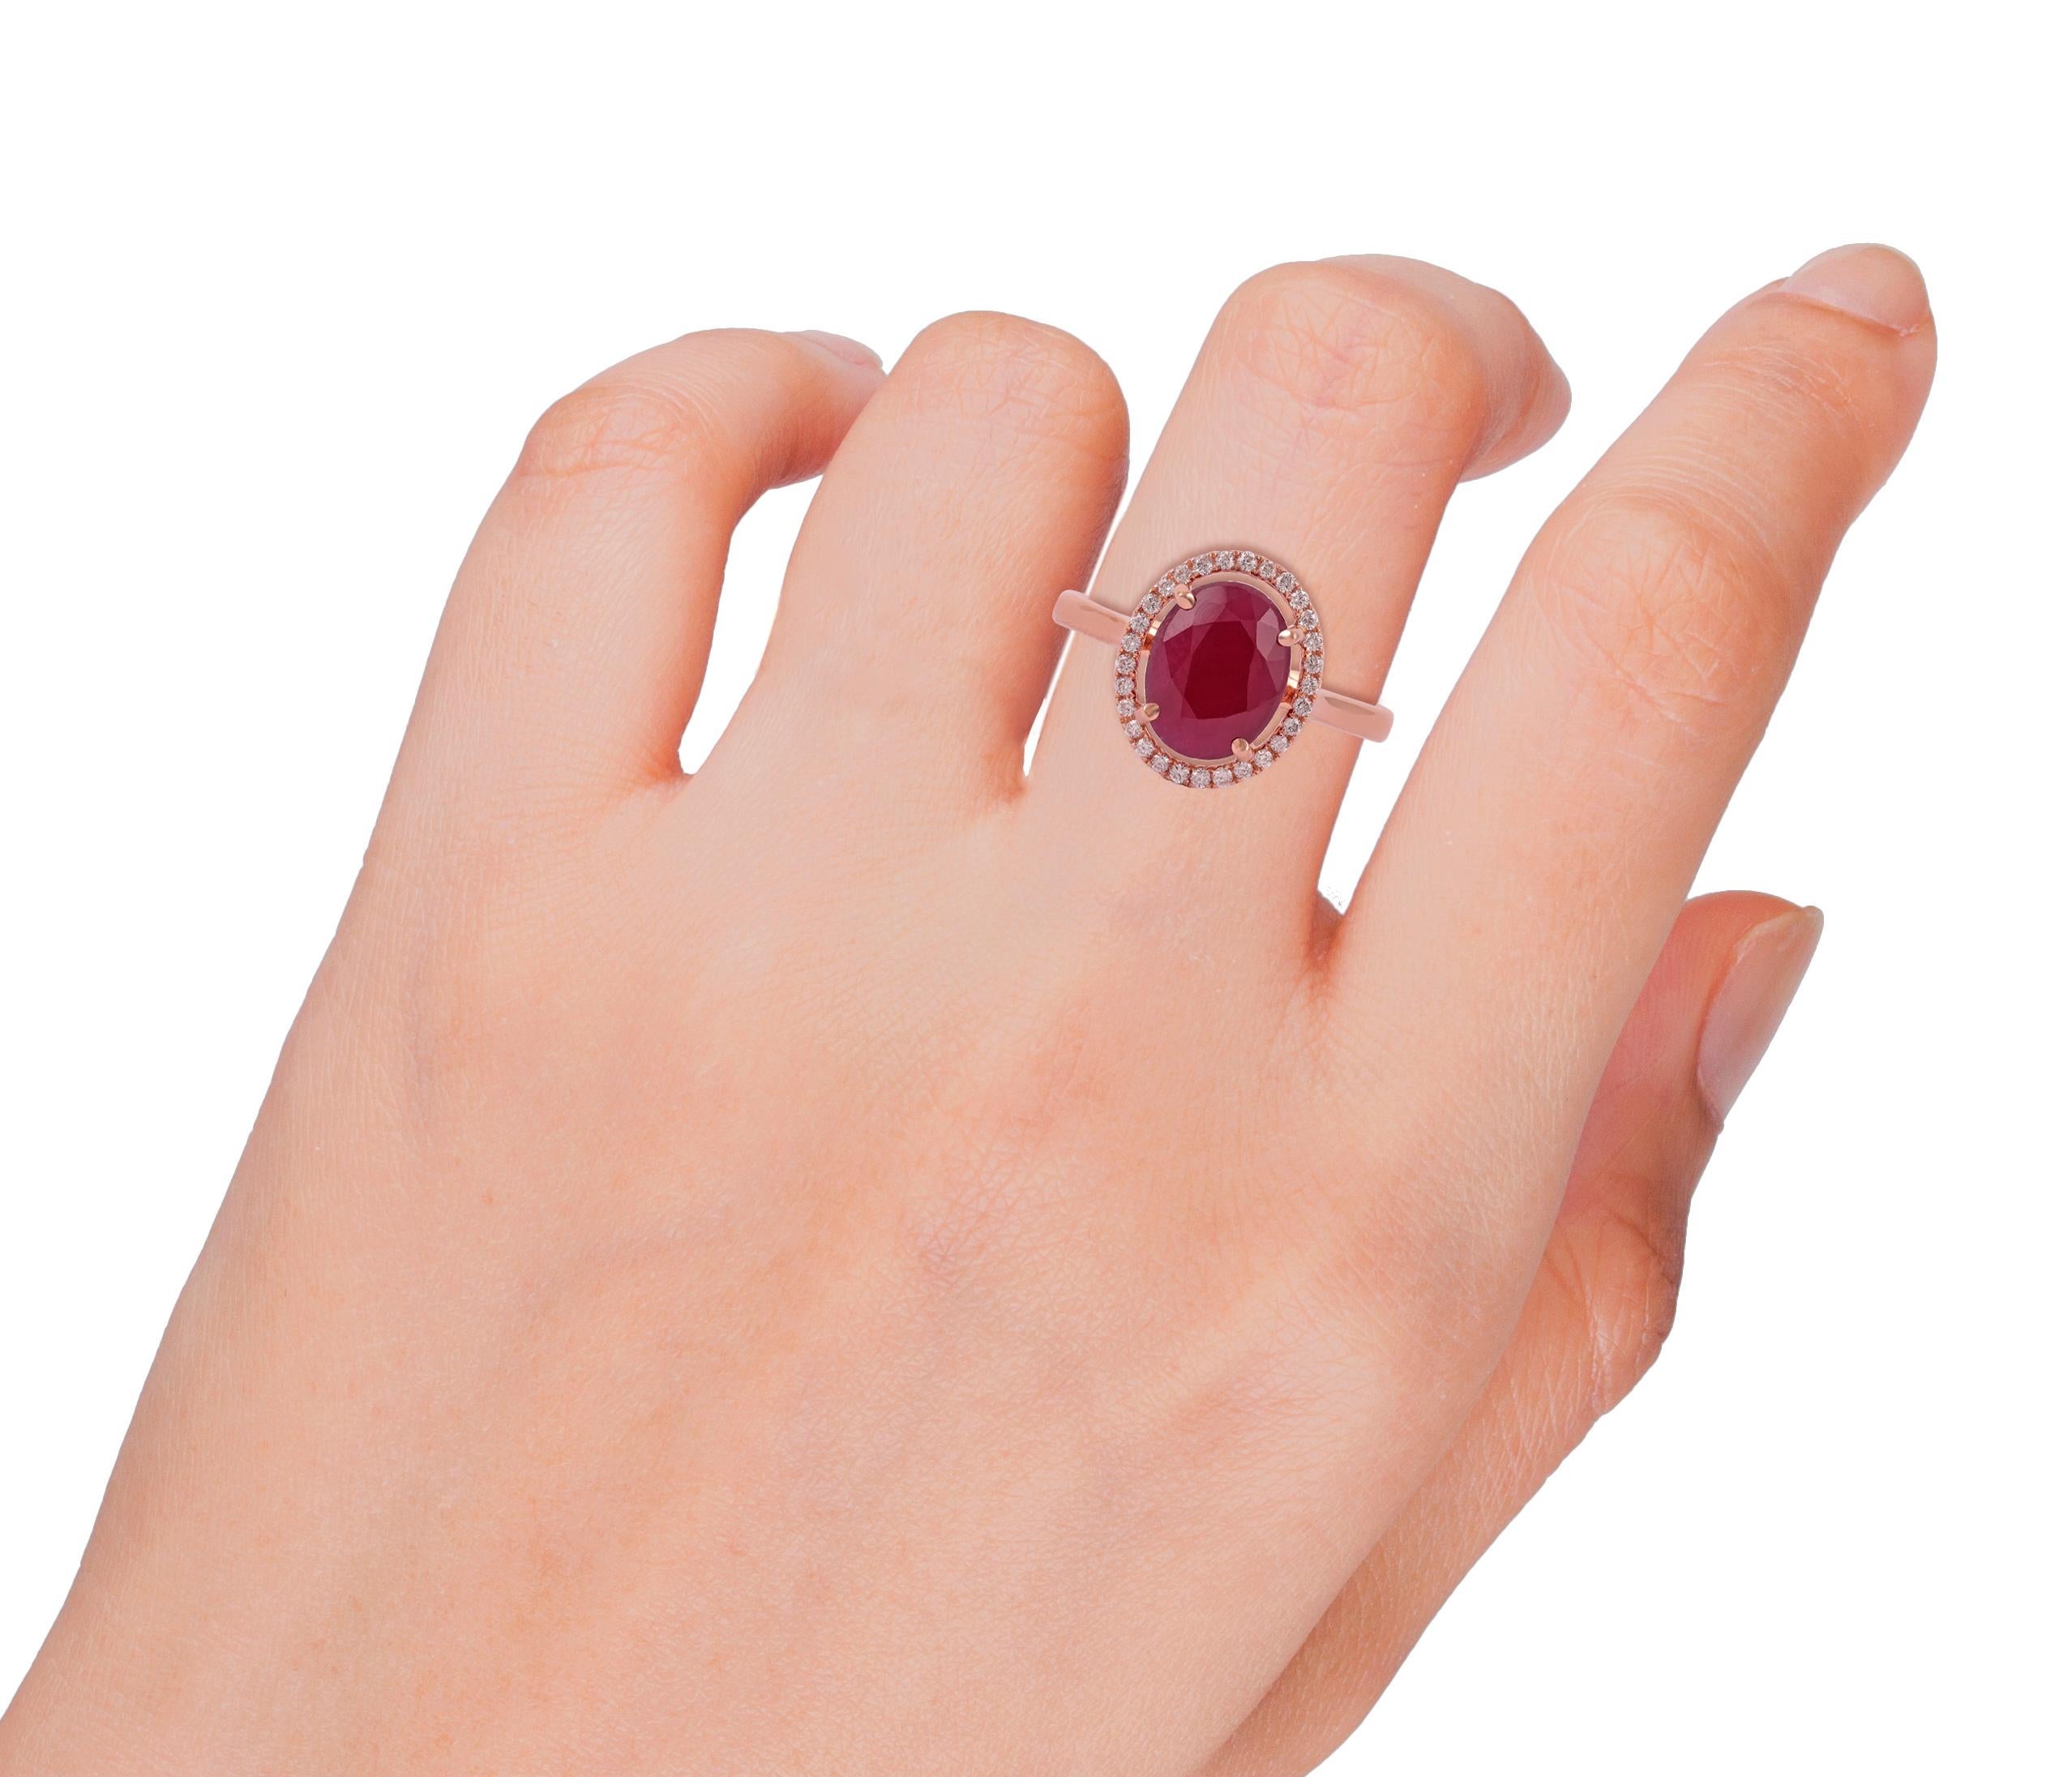 Mozambique 3.91 Carat Natural, Unheated Ruby and Diamond Ring in 18k Gold In New Condition For Sale In Jaipur, Rajasthan